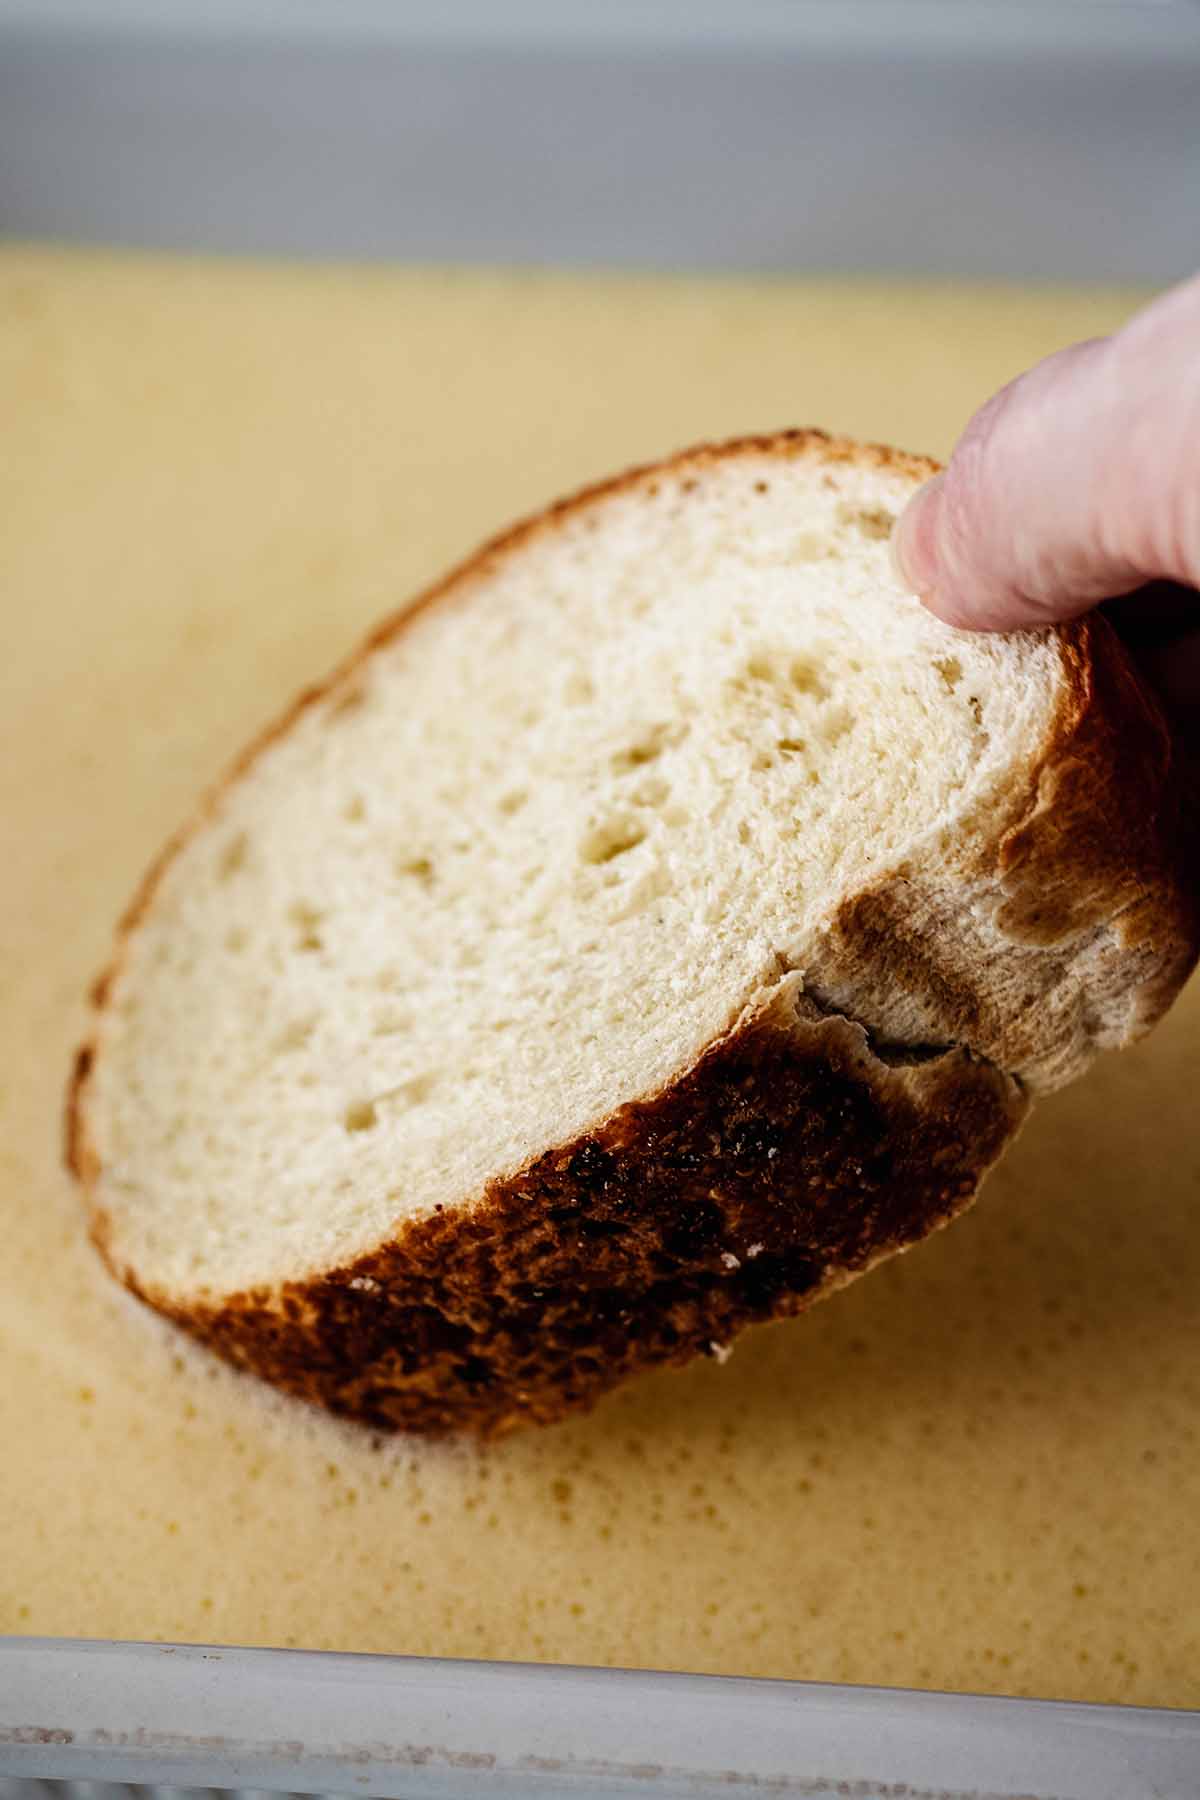 Slice of bread being dipped into egg and milk mixture.